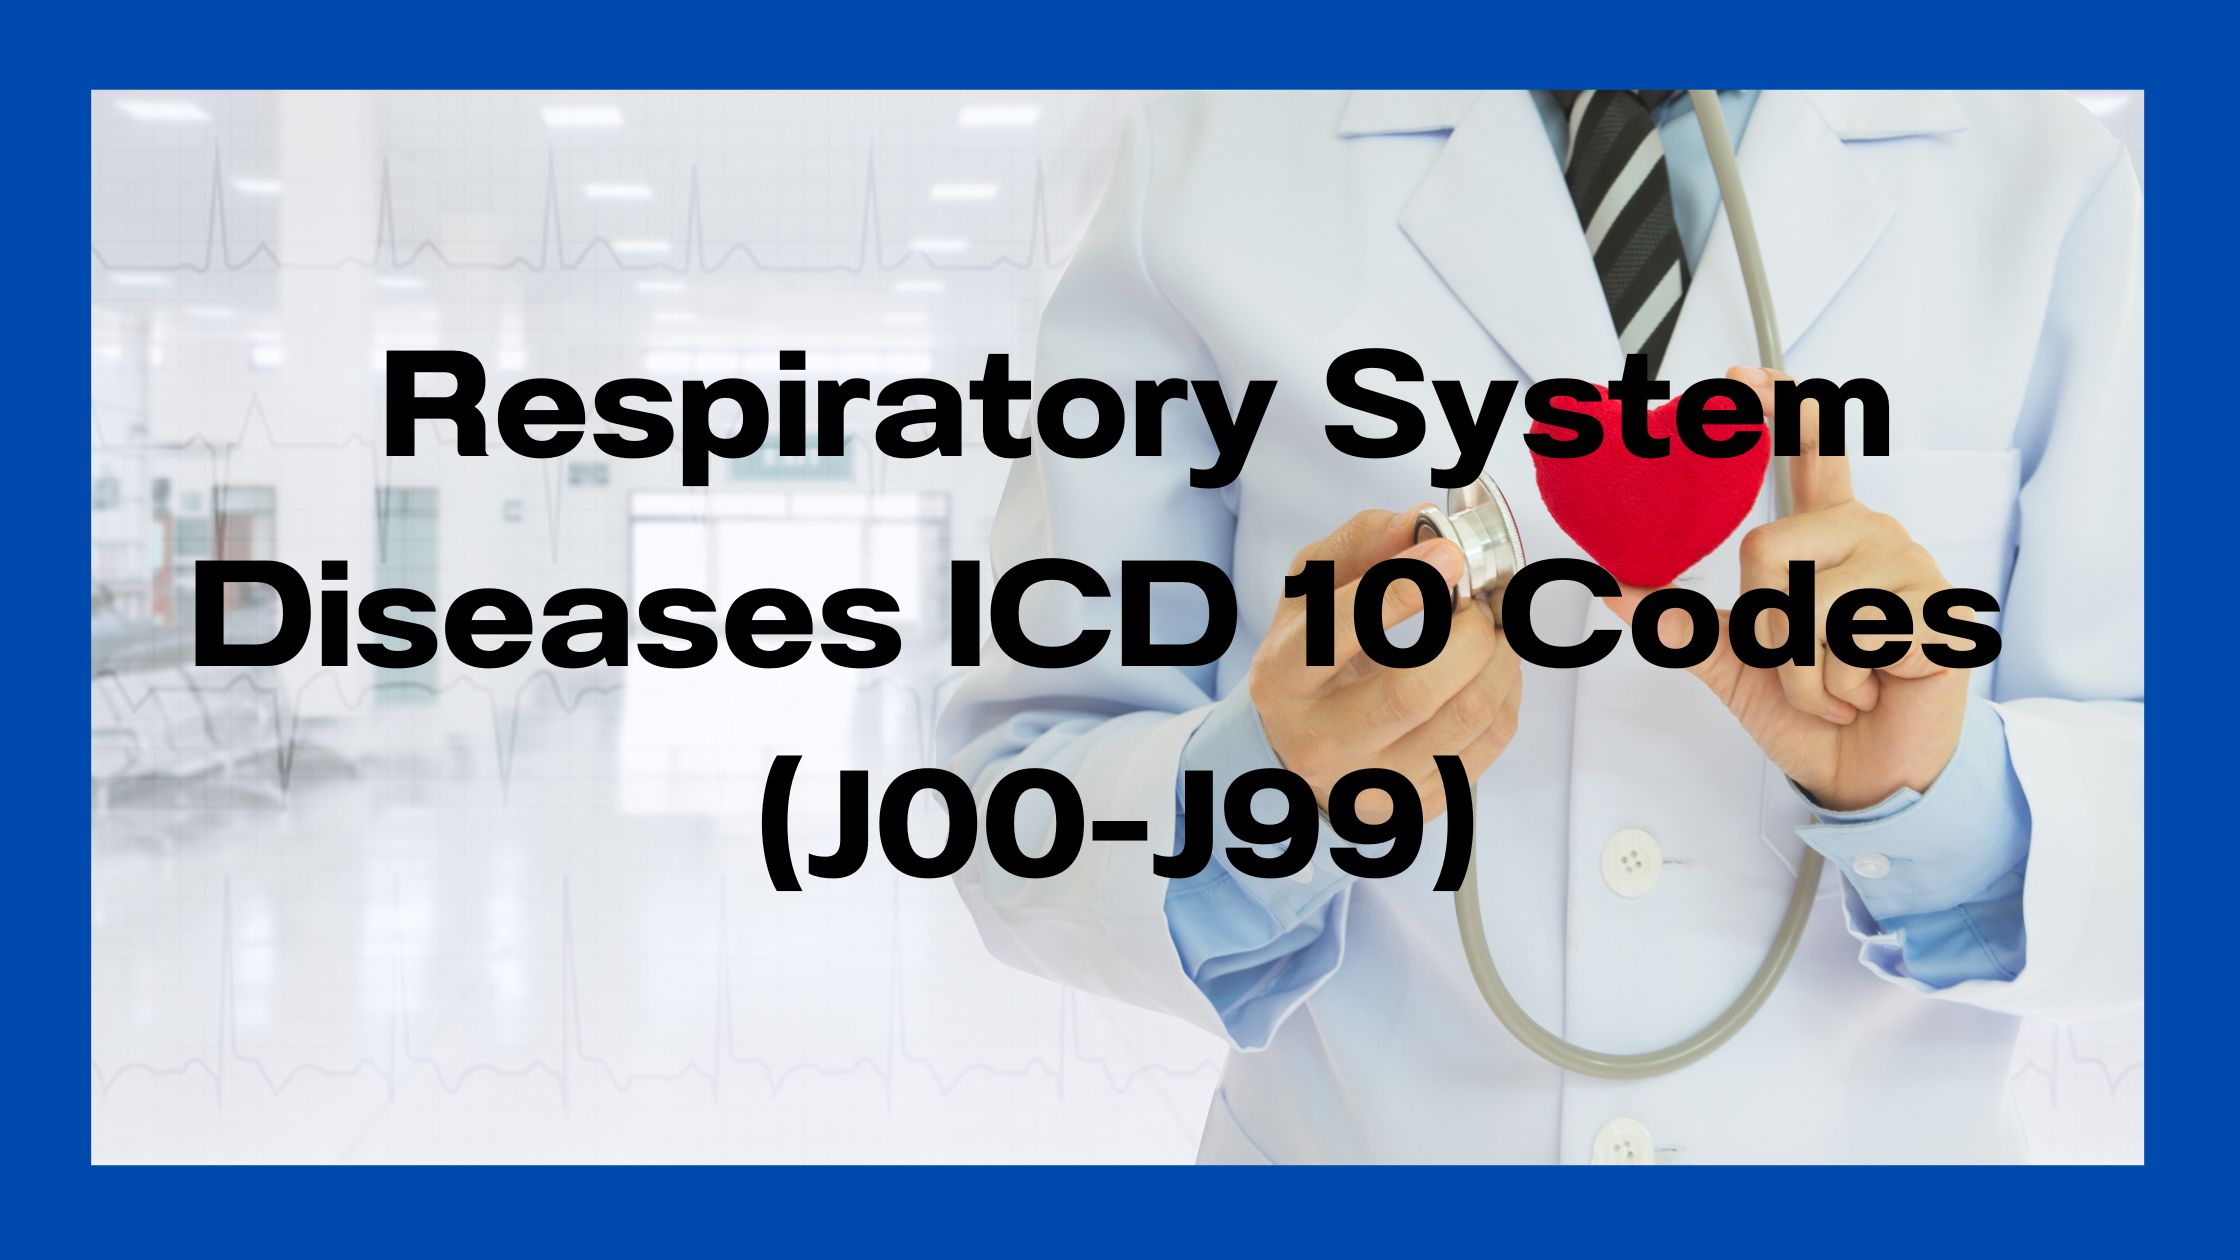 Respiratory System icd10 codes list